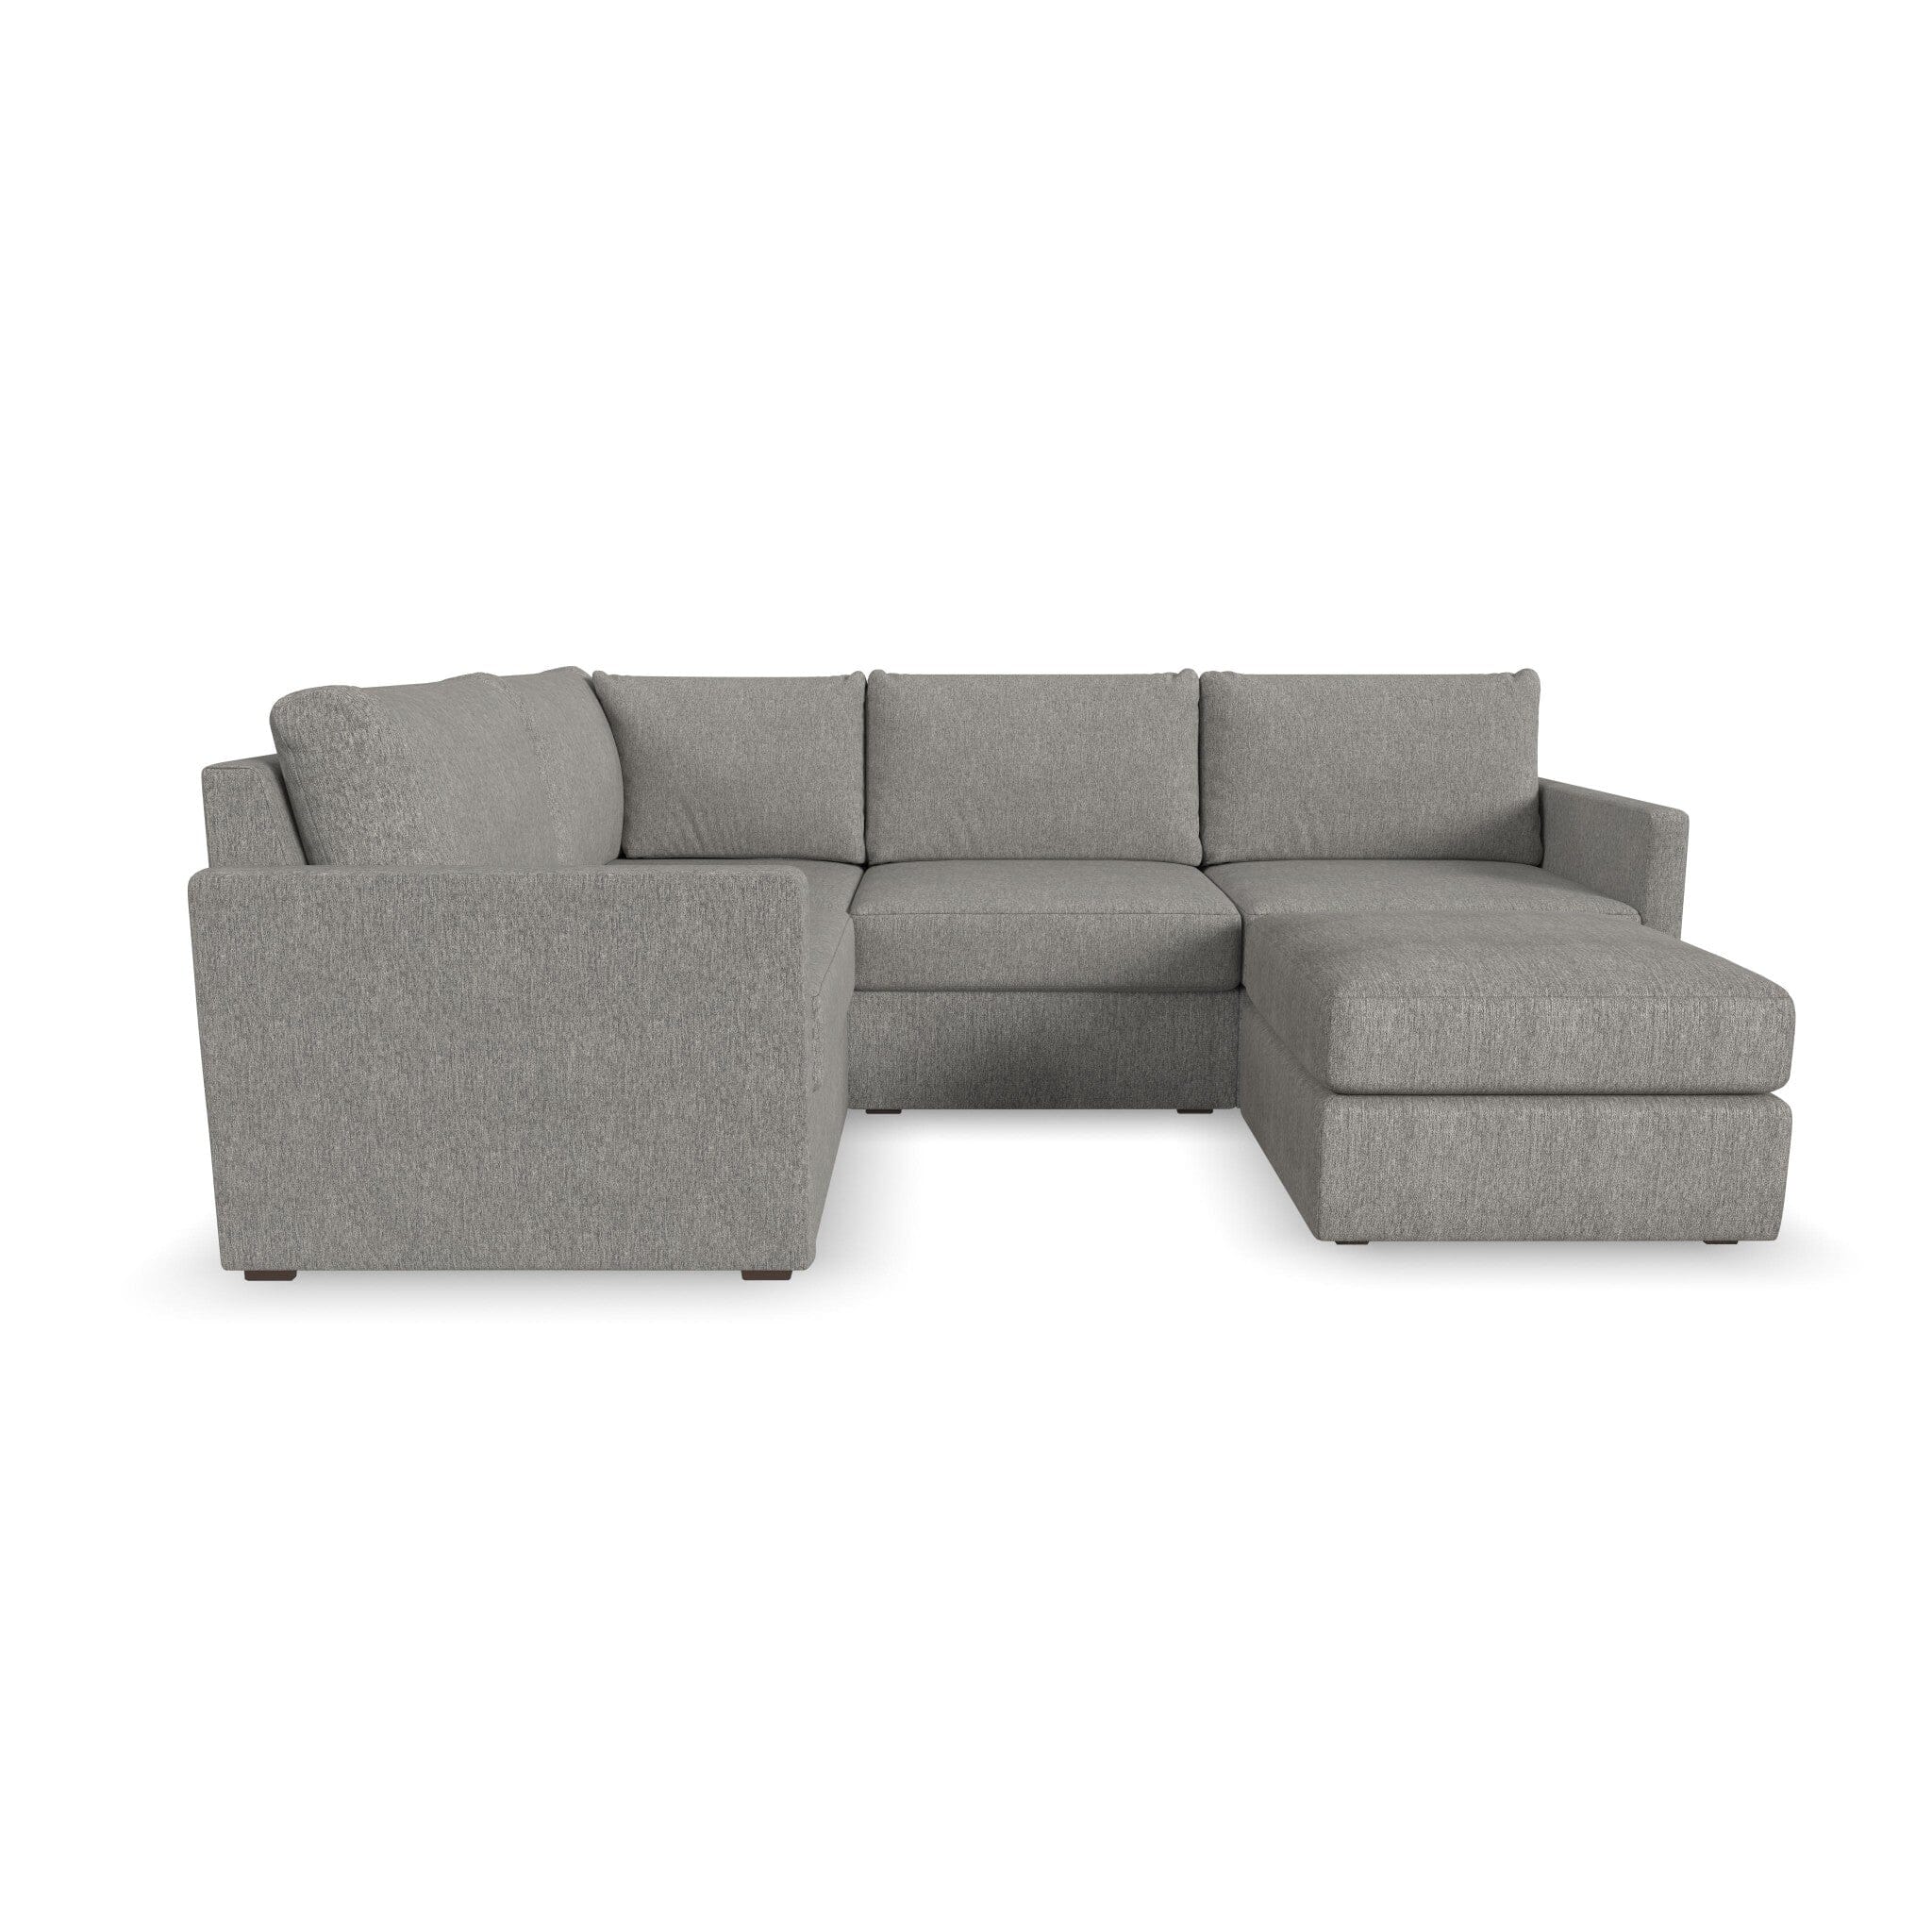 Traditional 4-Seat Sectional with Narrow Arm and Ottoman By Flex Sectional Flex